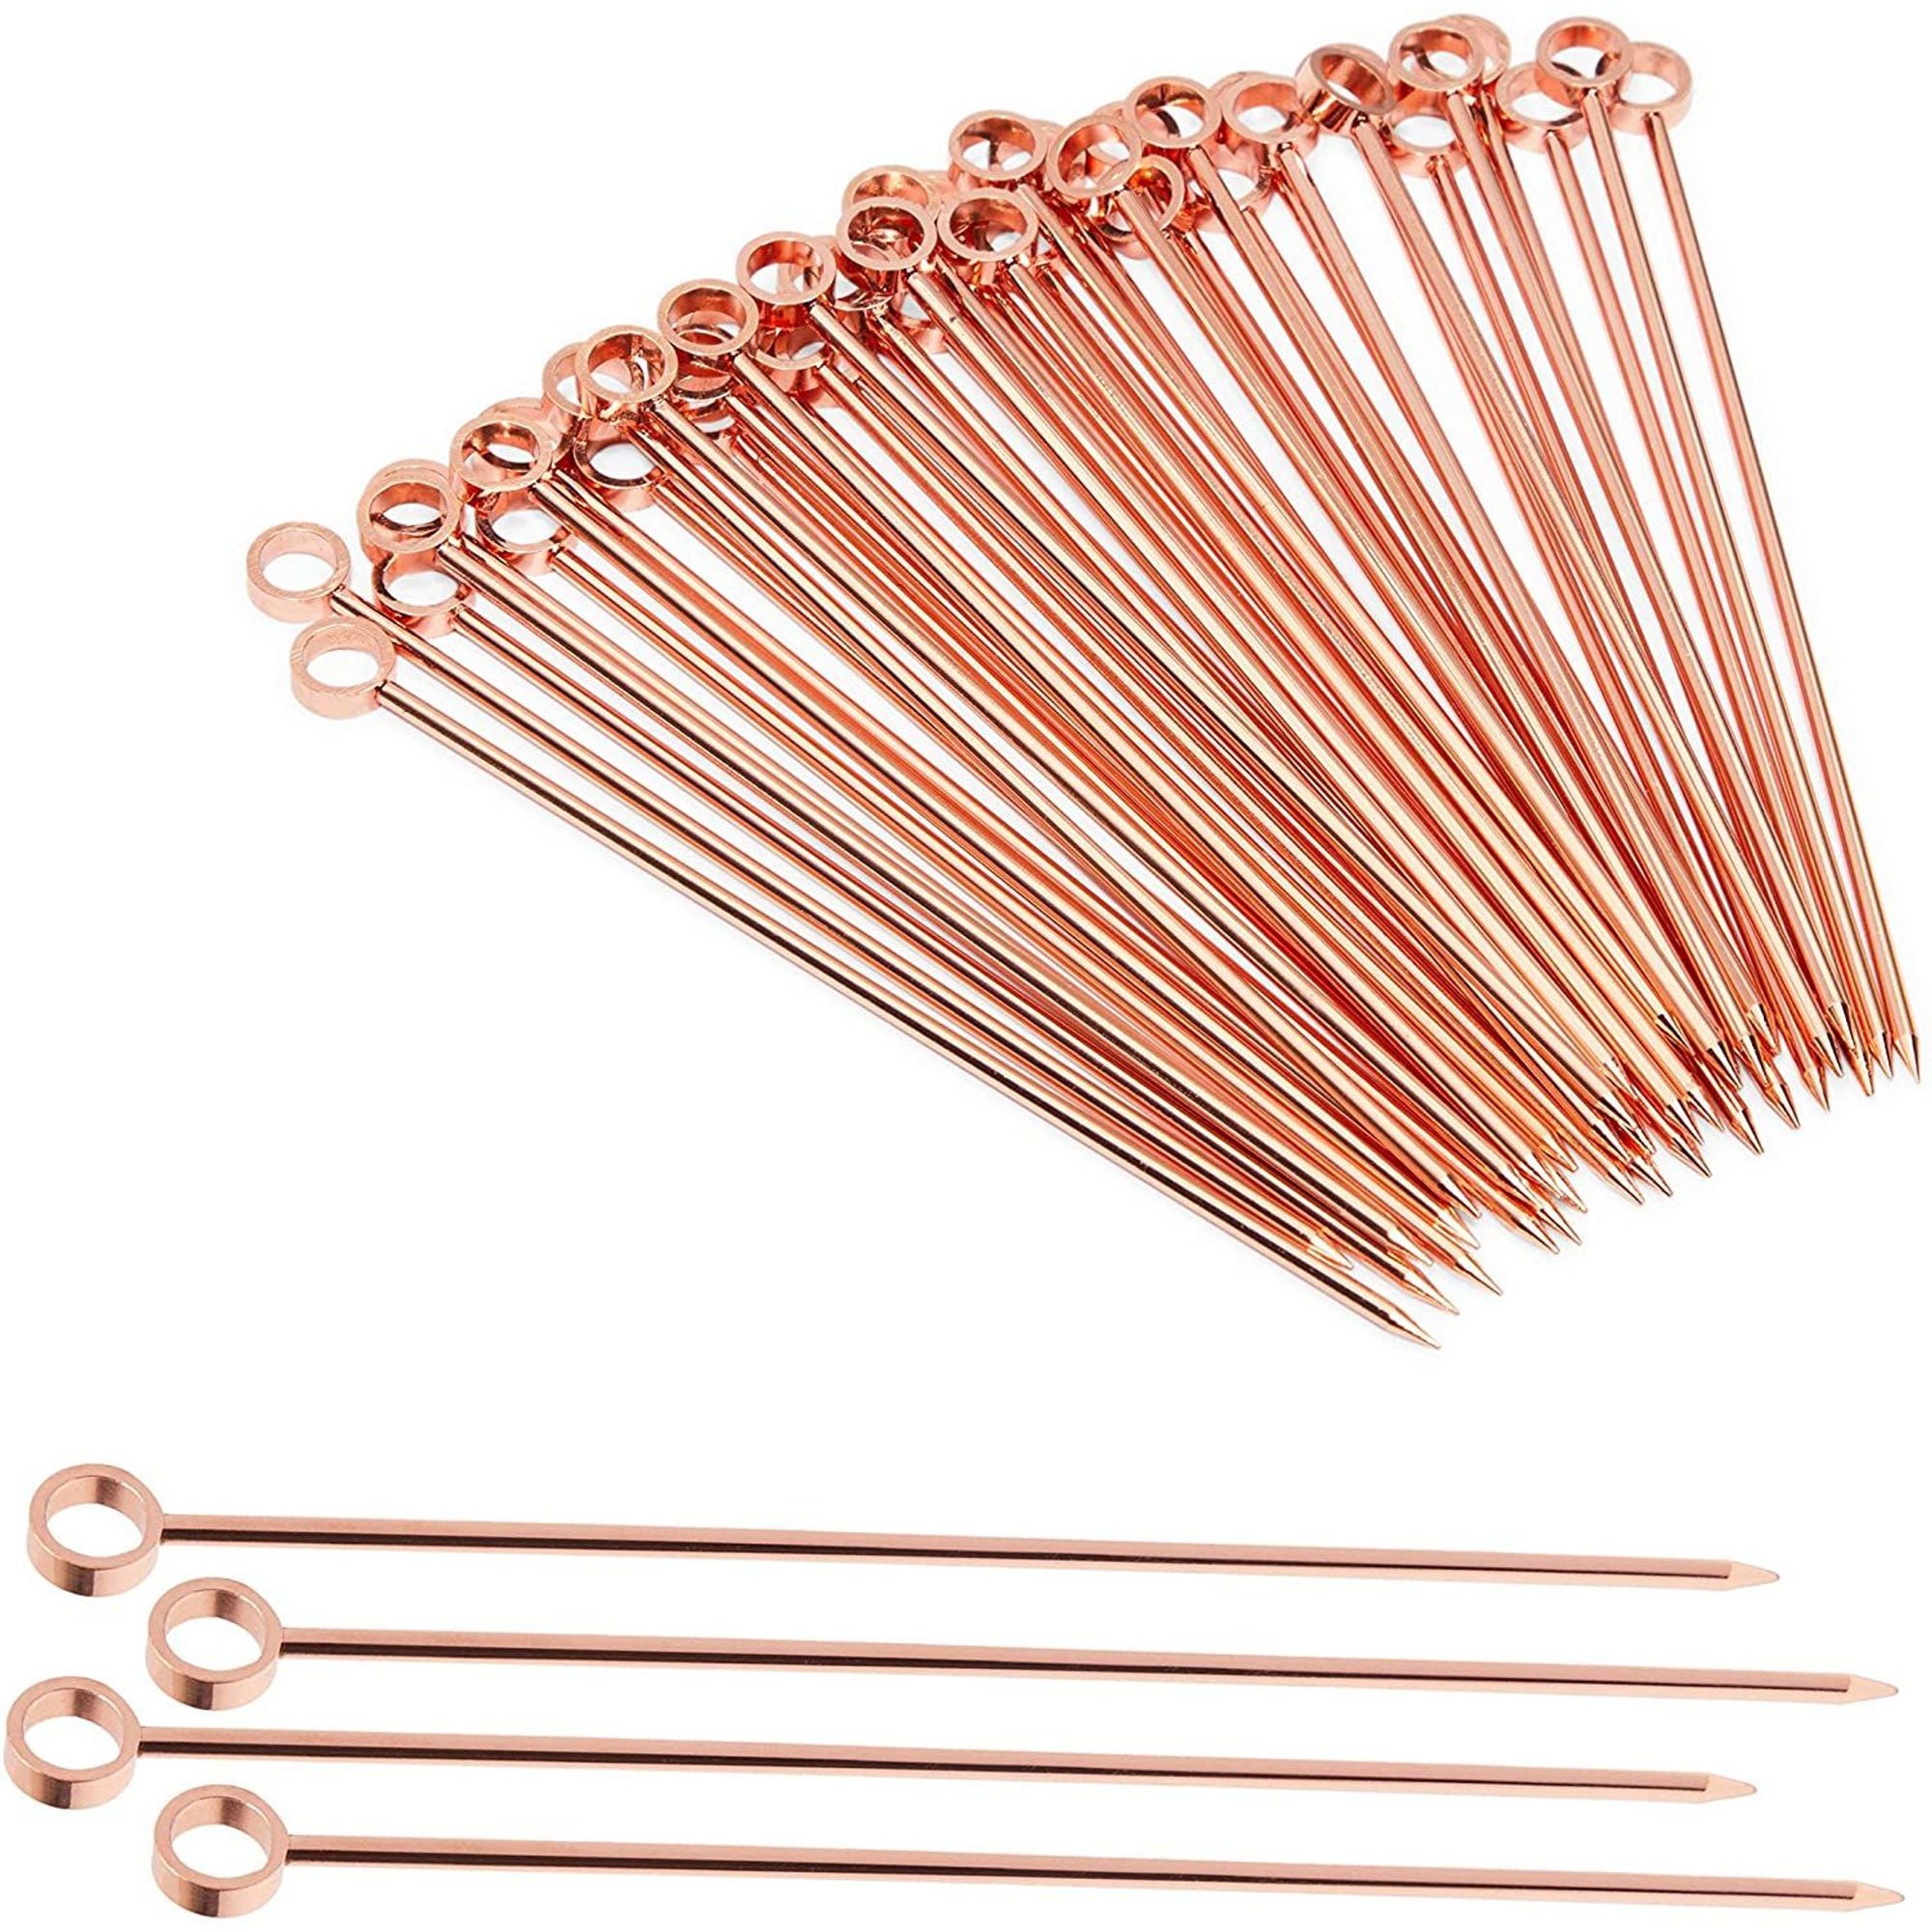 Gold, Colorful, 16 Barbeque Snacks and Club Sandwiches Stainless Steel Cocktail Picks Fruits Toothpicks Appetizer Drink Sticks for Bar Party 